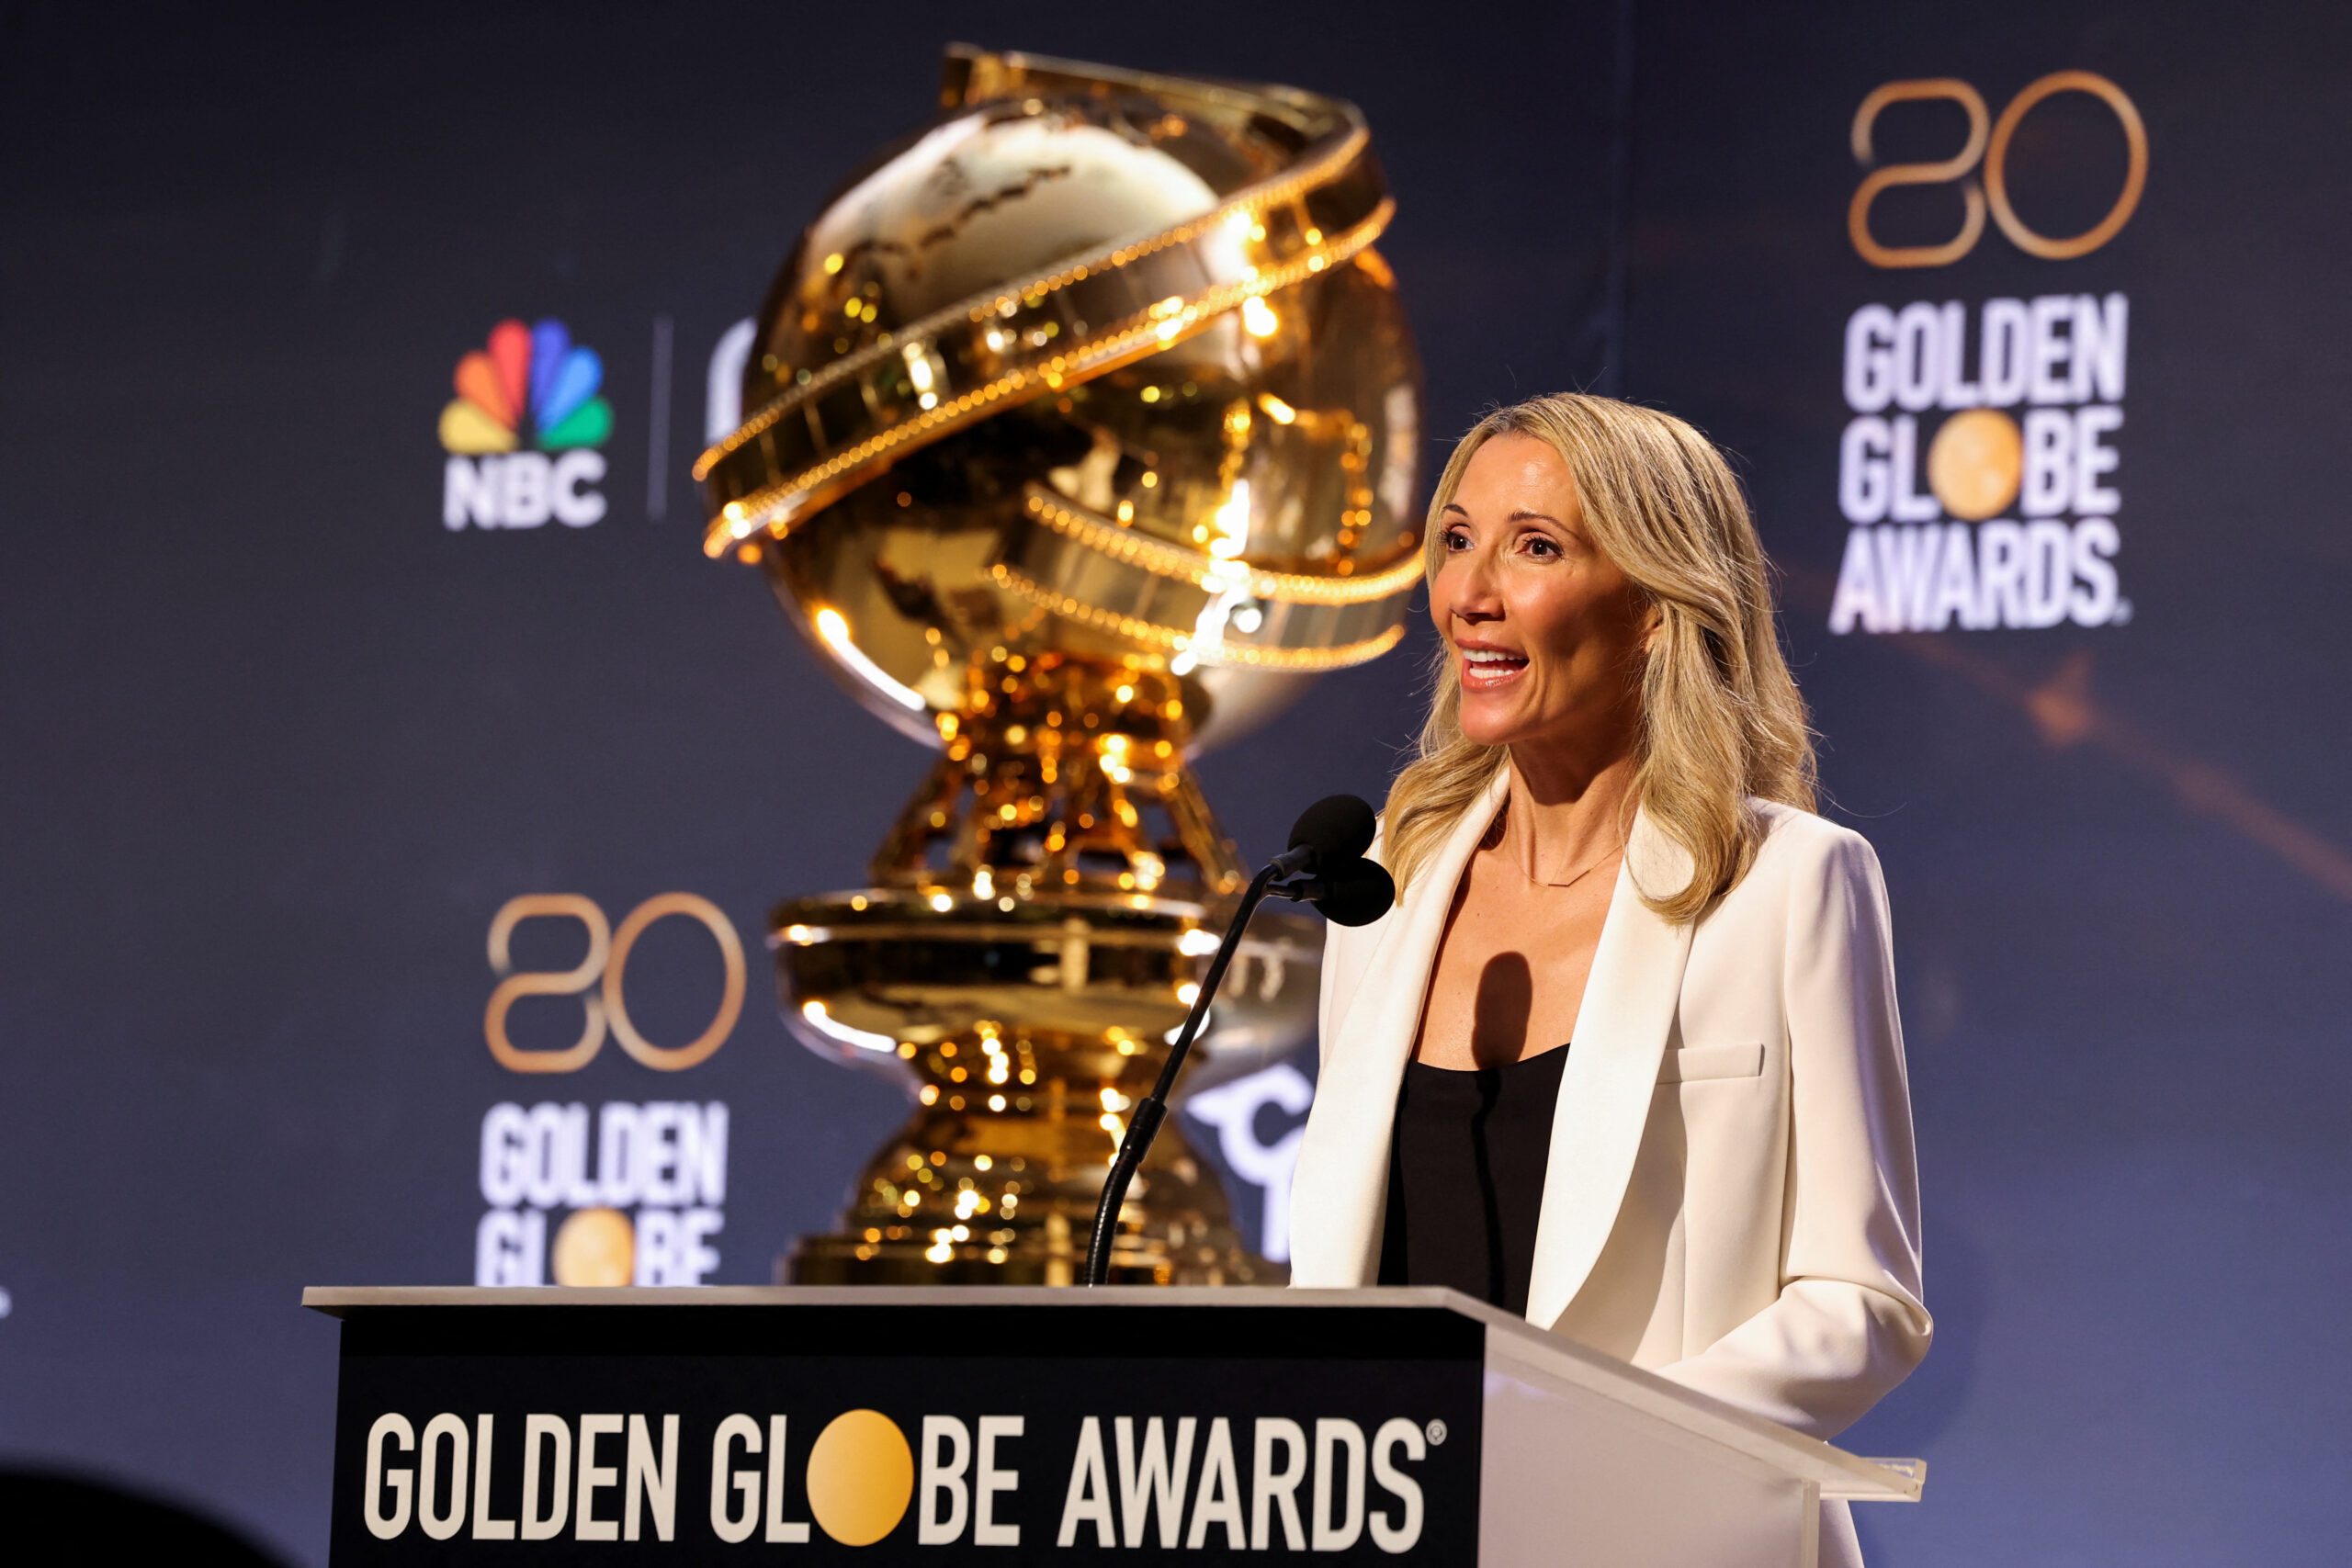 Tarnished Golden Globes aim to regain role as Hollywood’s ‘party of the year’